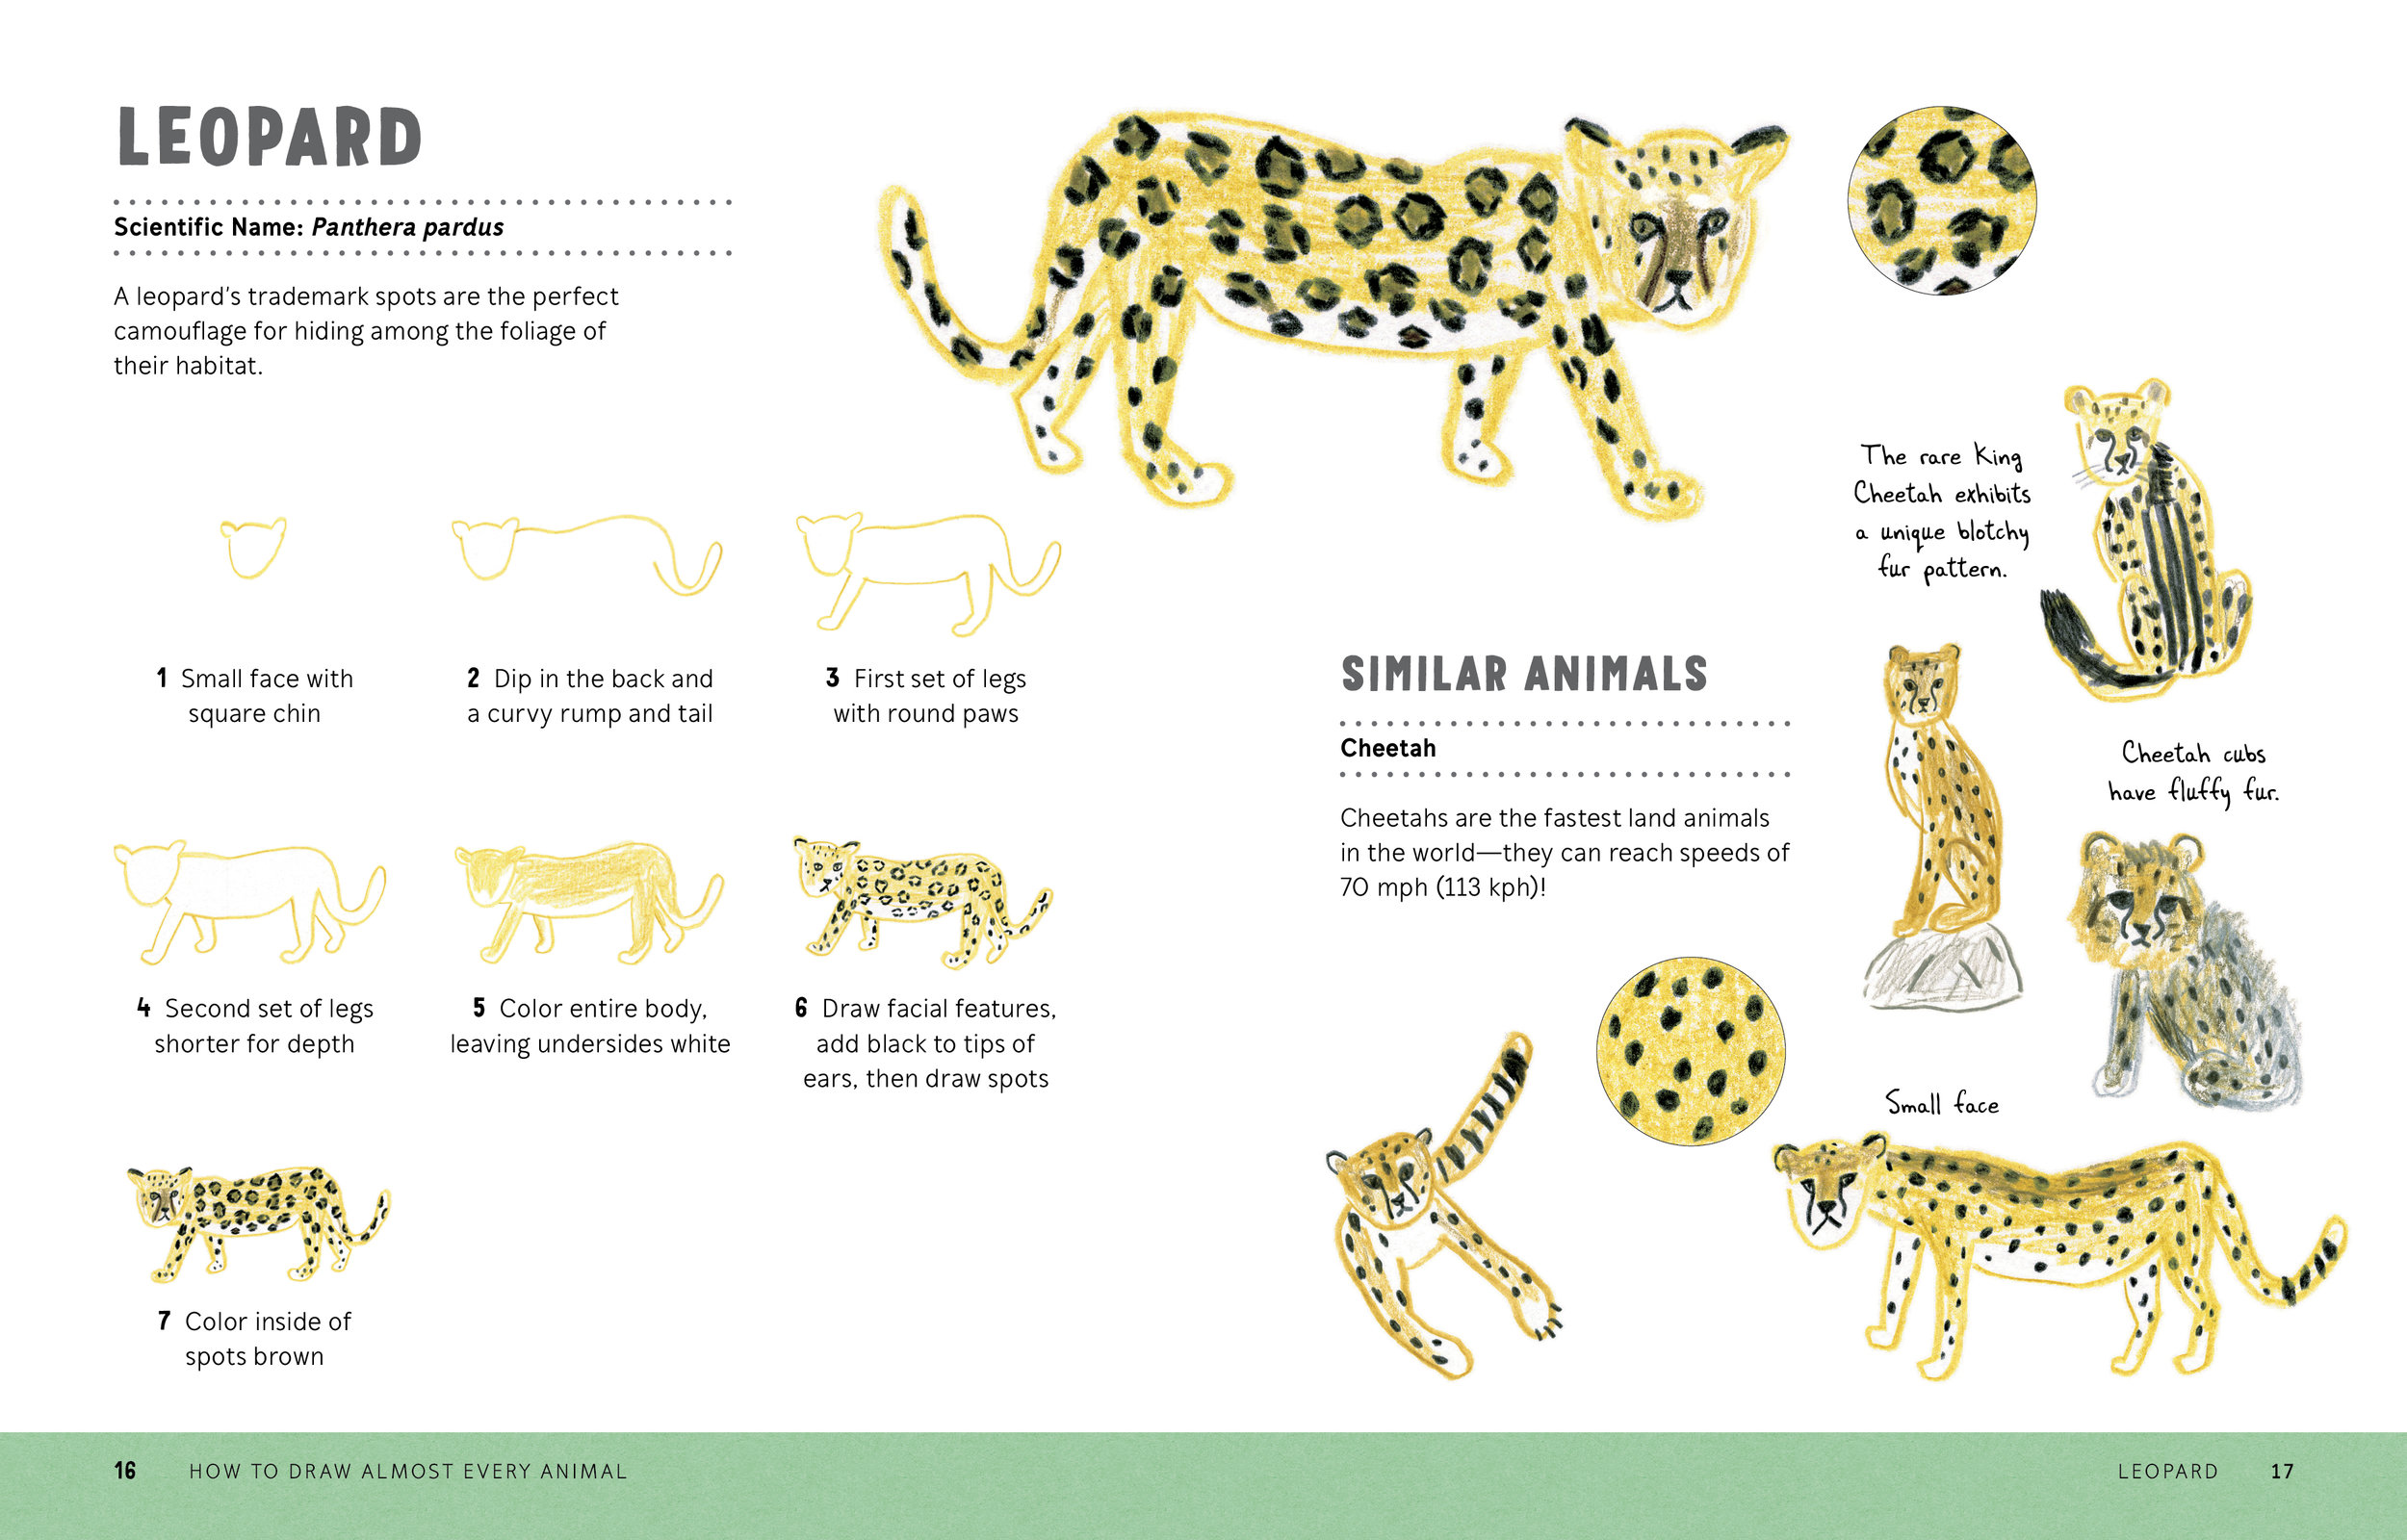 How to Draw Almost Every Animal 16.17.jpg